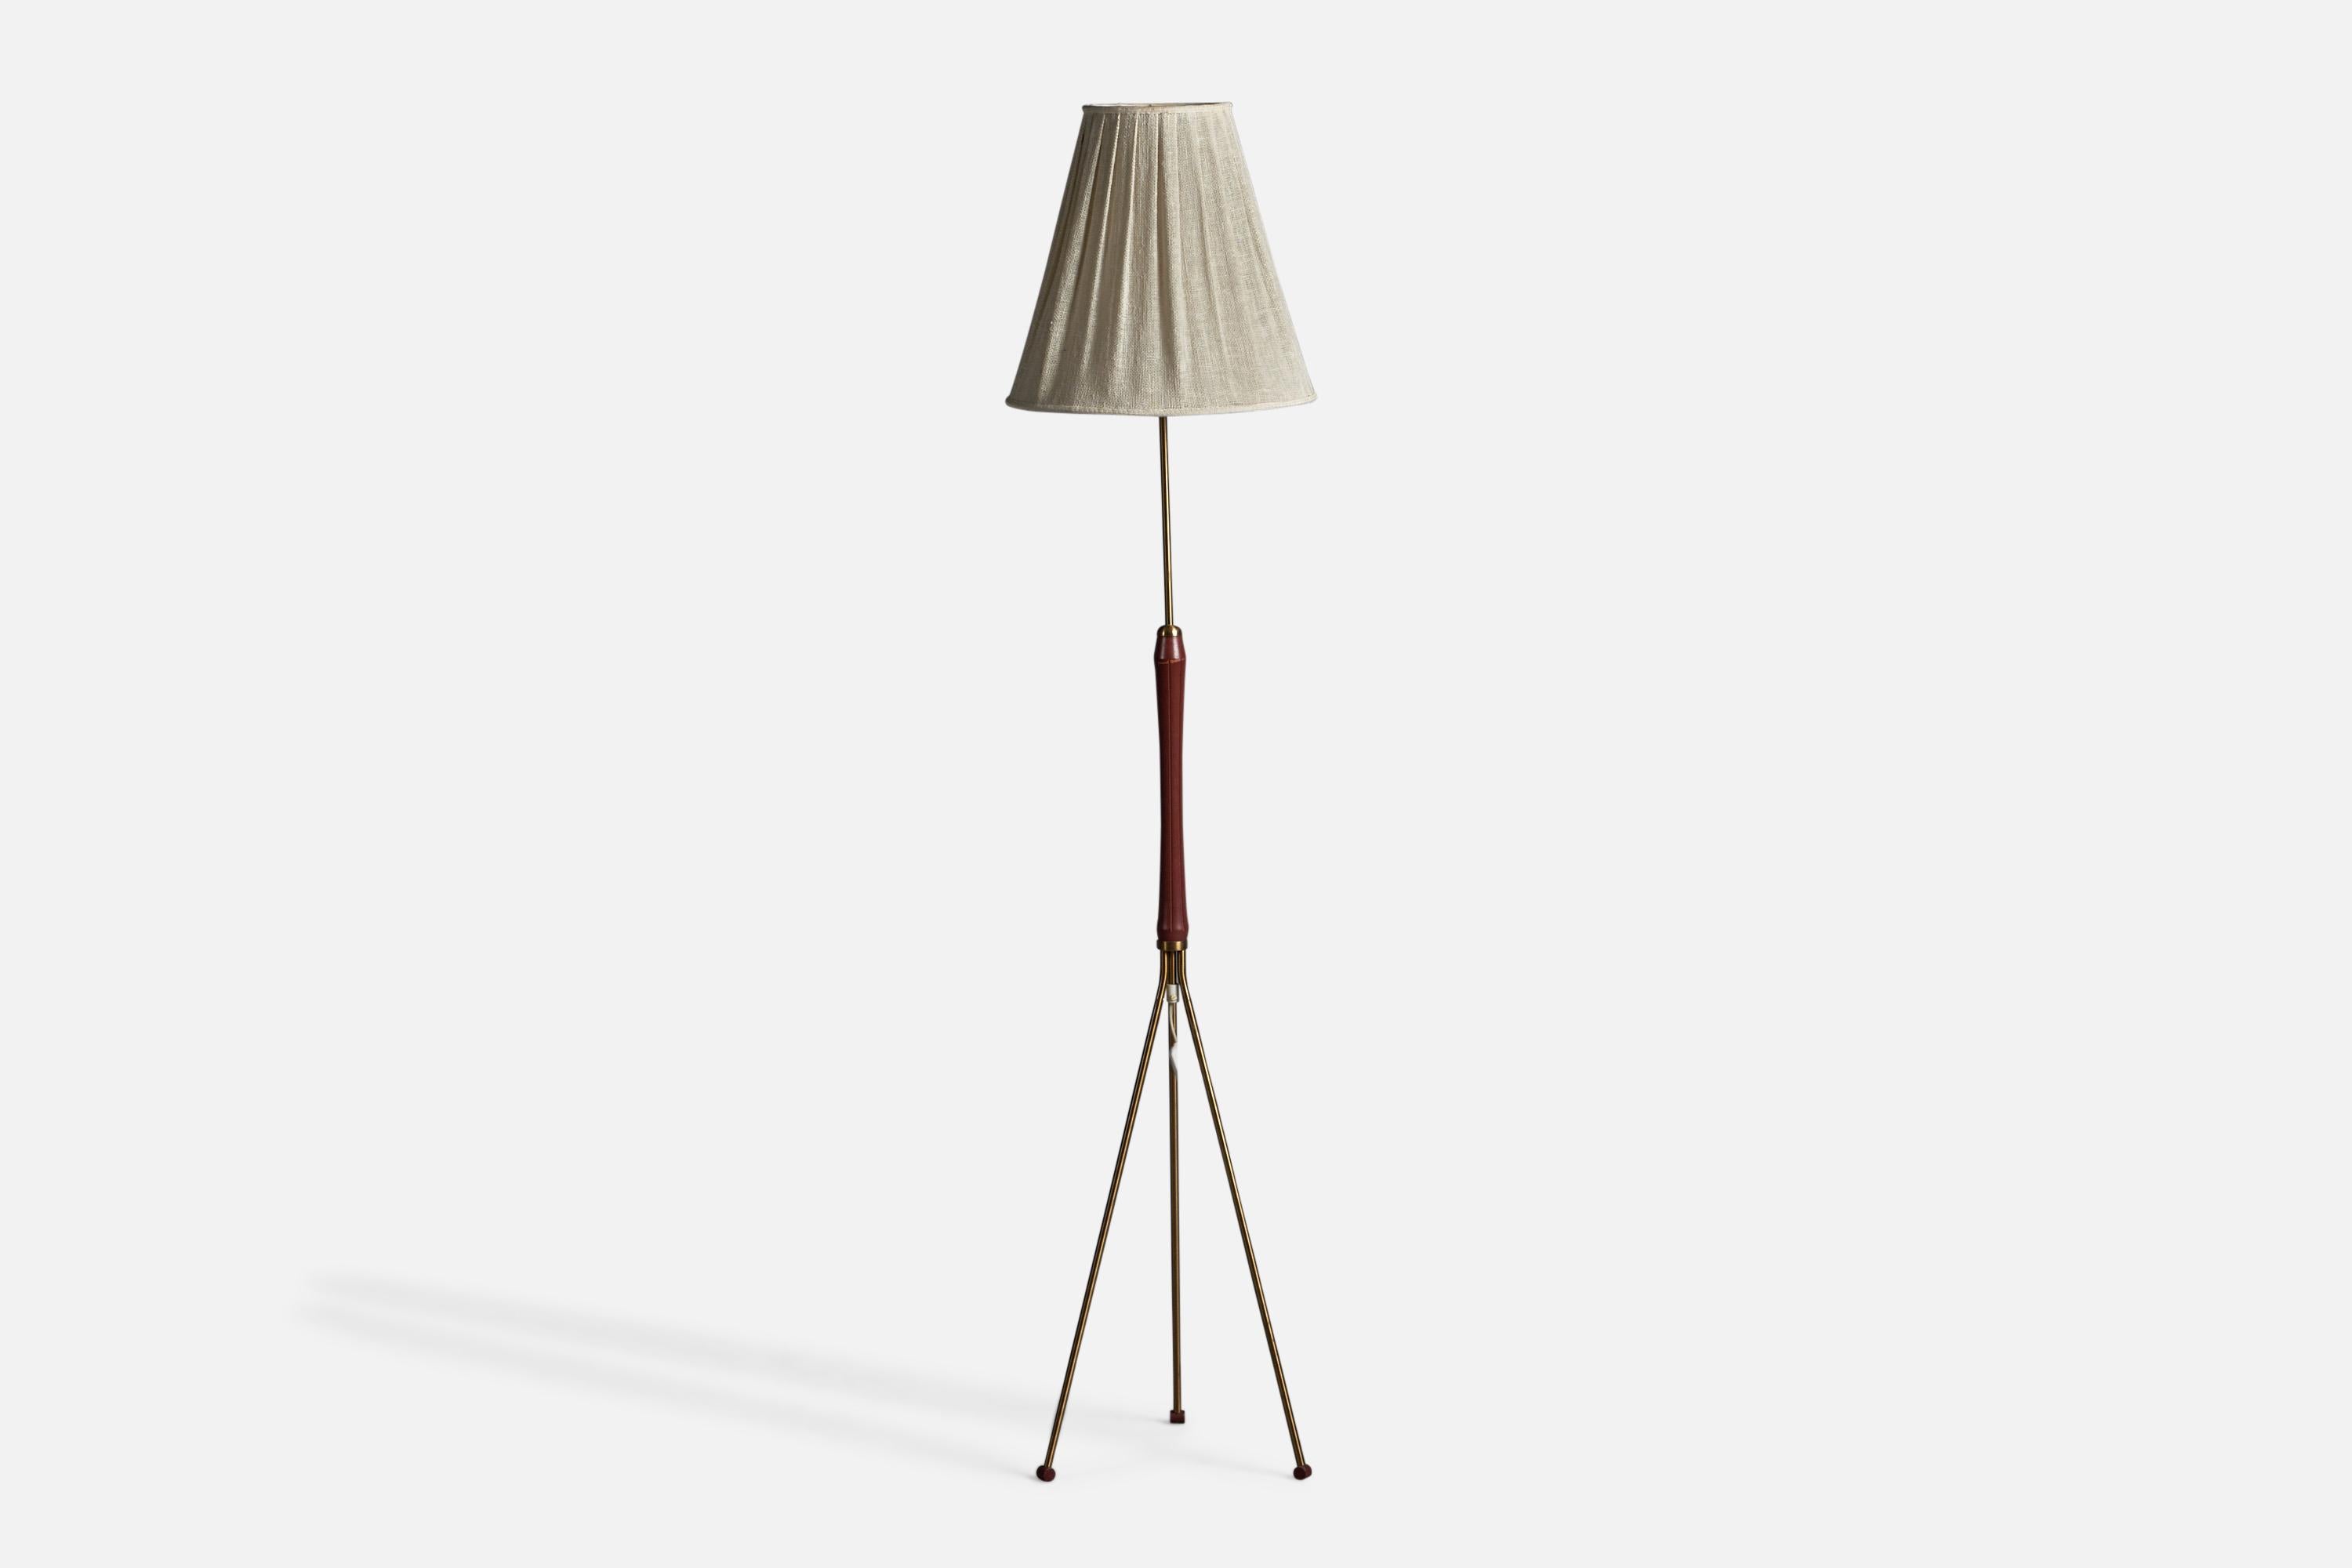 A brass, red-lacquered plastic and fabric floor lamp, designed and produced in Sweden, c. 1960s.

Overall Dimensions (inches): 60